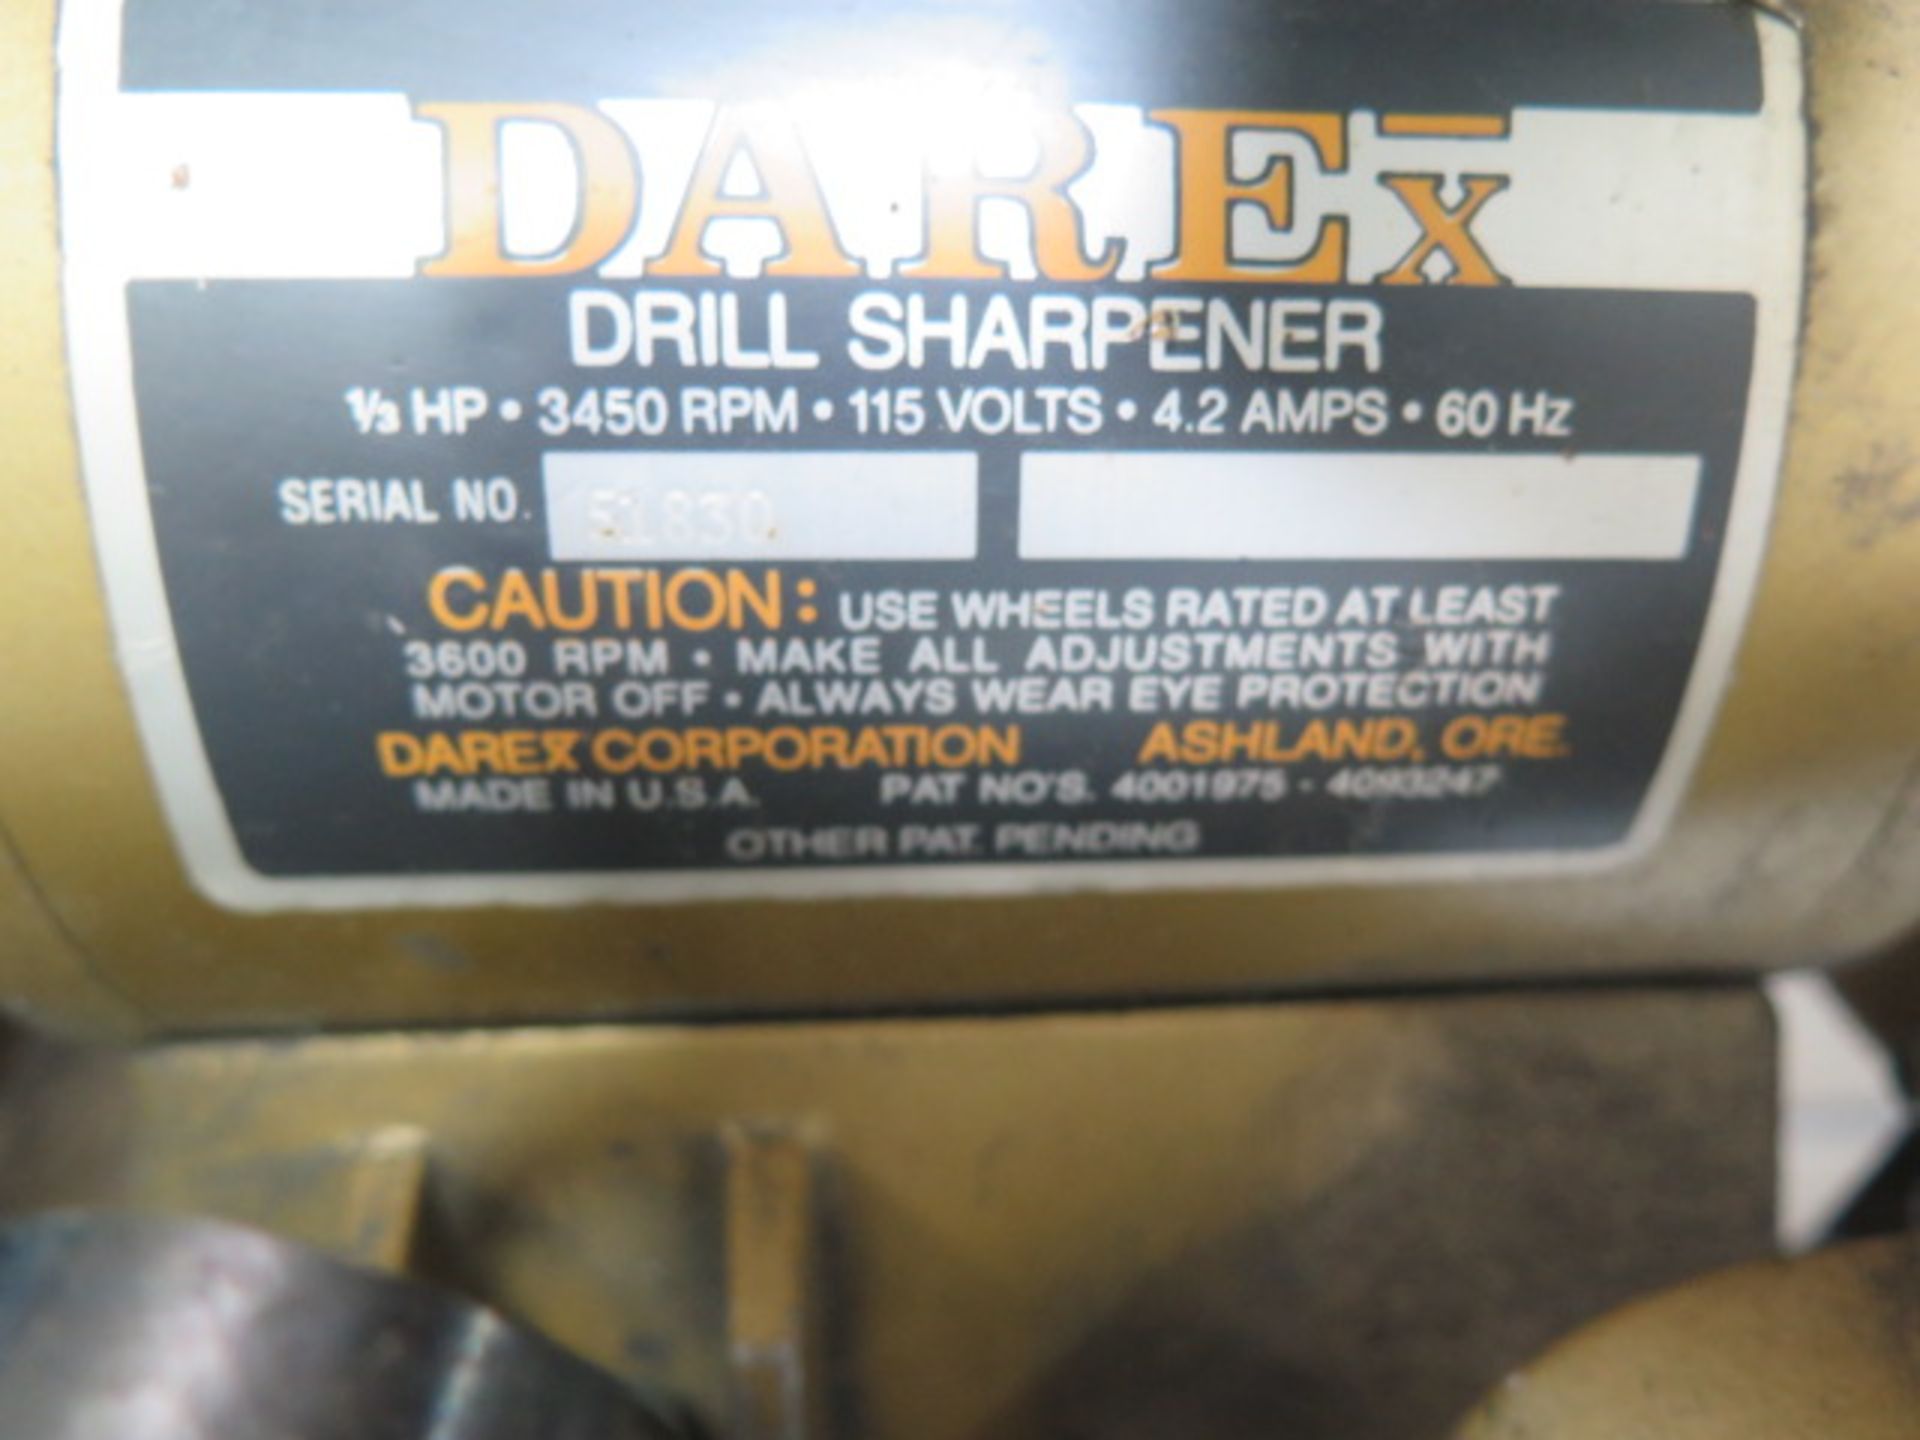 Darex Pedestal Drill Sharpener. This Item is Sold AS IS and with NO Warranty Applied. - Image 7 of 7